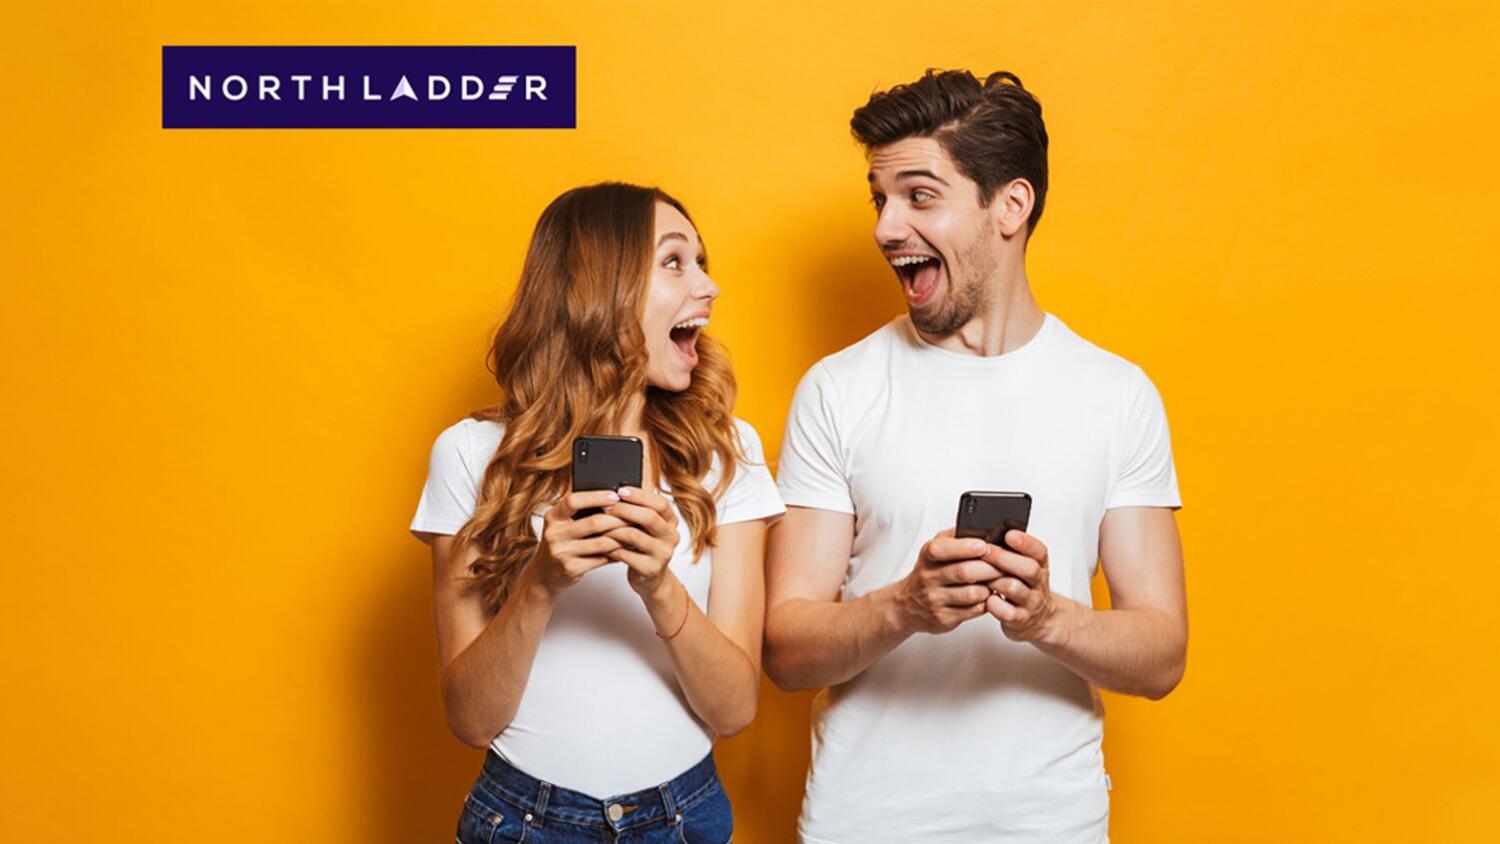 Image of happy couple with phone in their hand looking at each other against a yellow background.